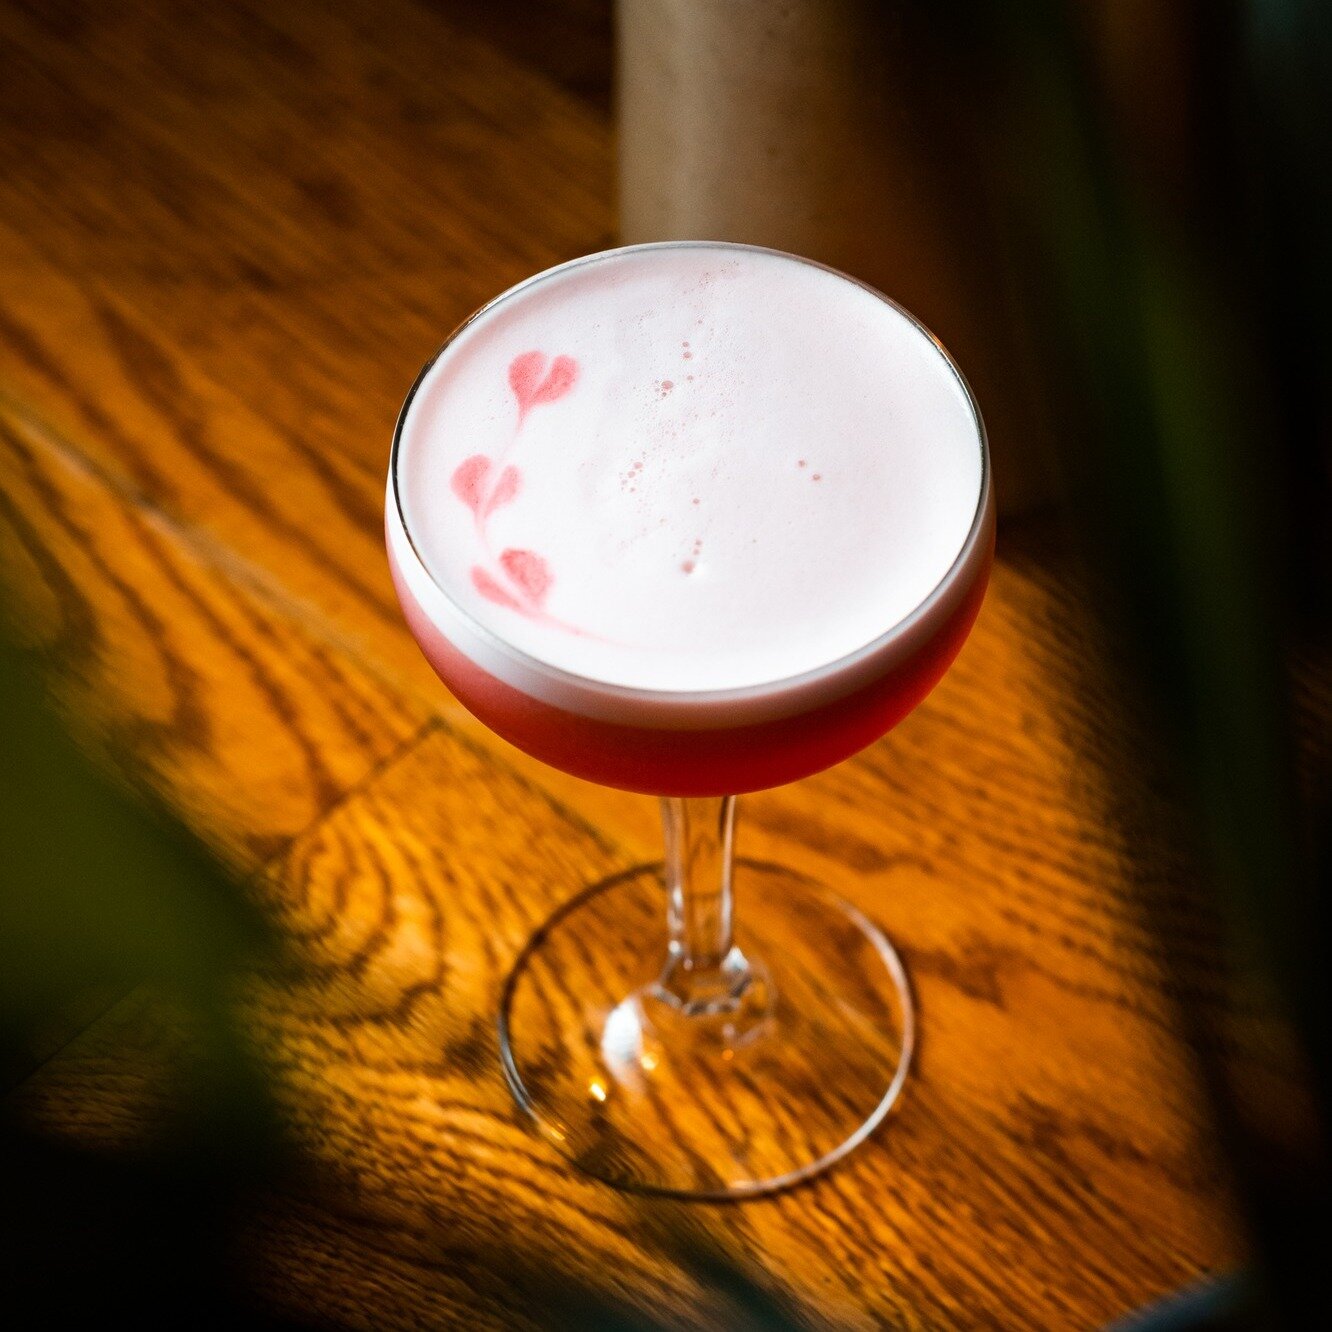 Our Clover Club is almost too pretty to drink 😍

Get in for drinks with the girls this weekend 💋

Bookings available + walk-ins welcome.